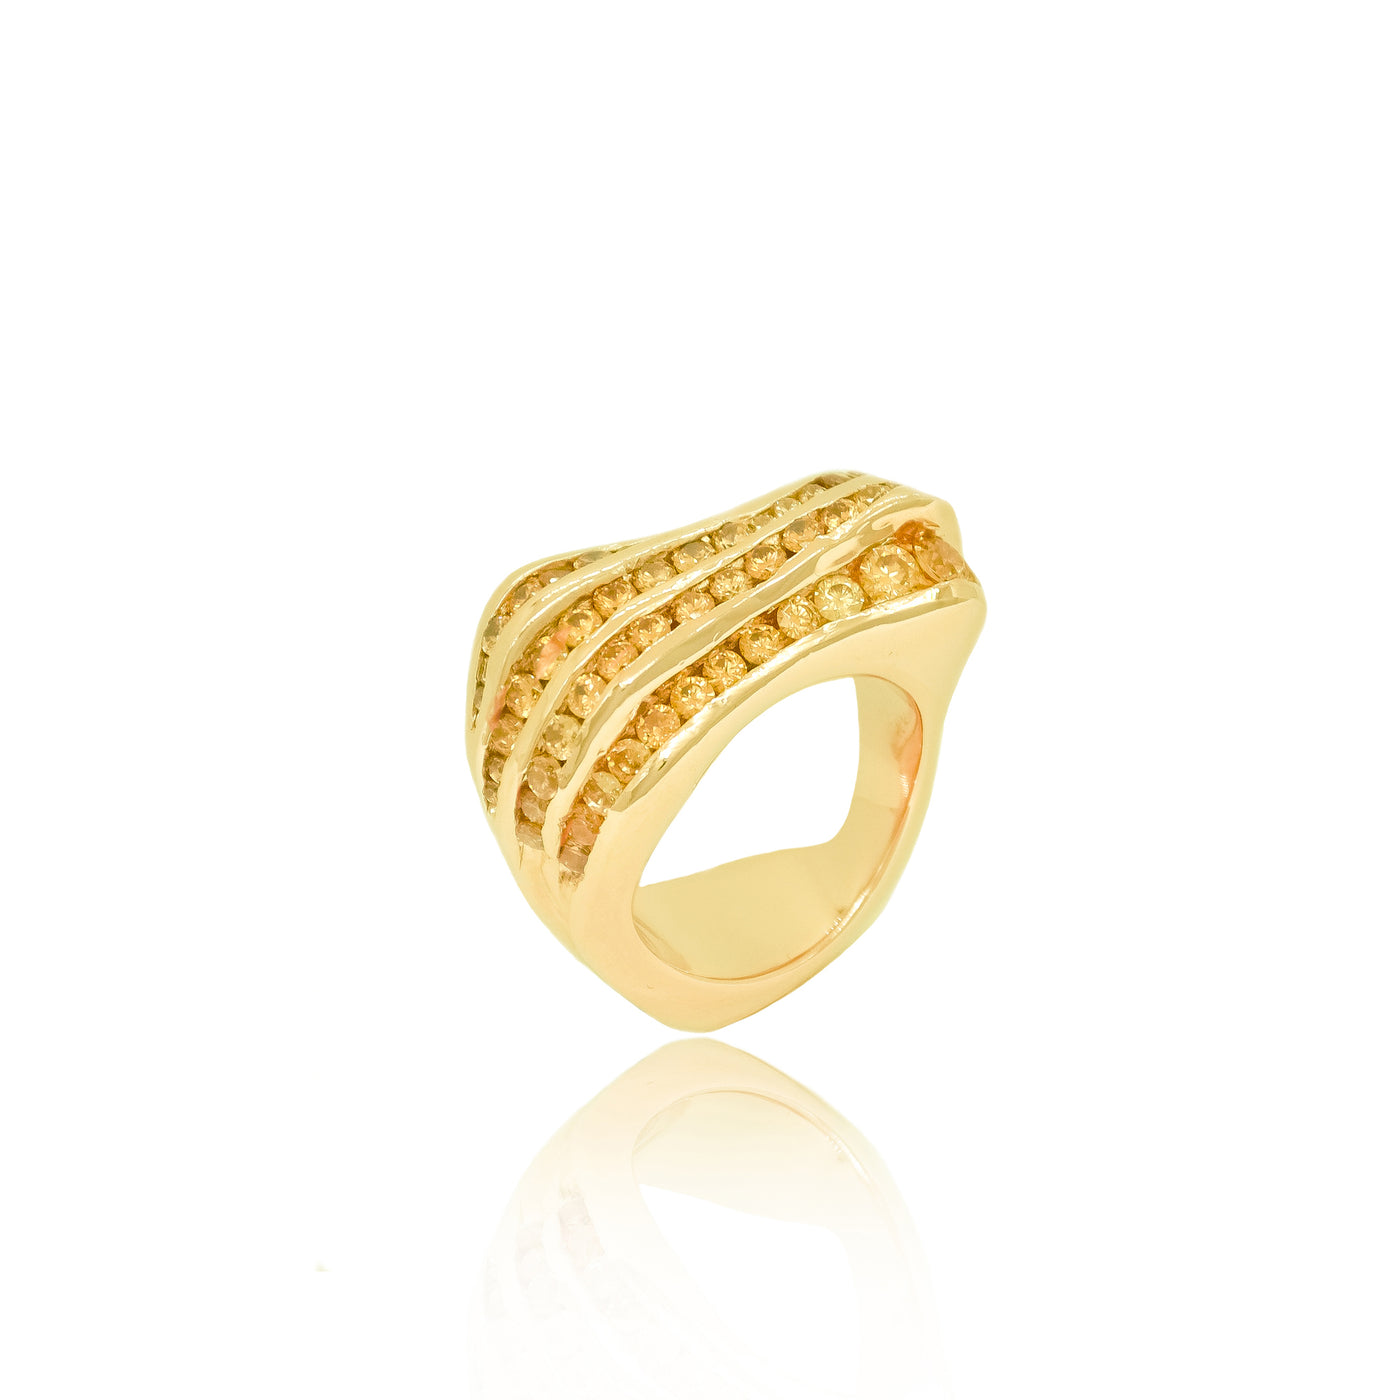 Gold sculptural cocktail ring with champagne diamonds from Atelier ORMAN